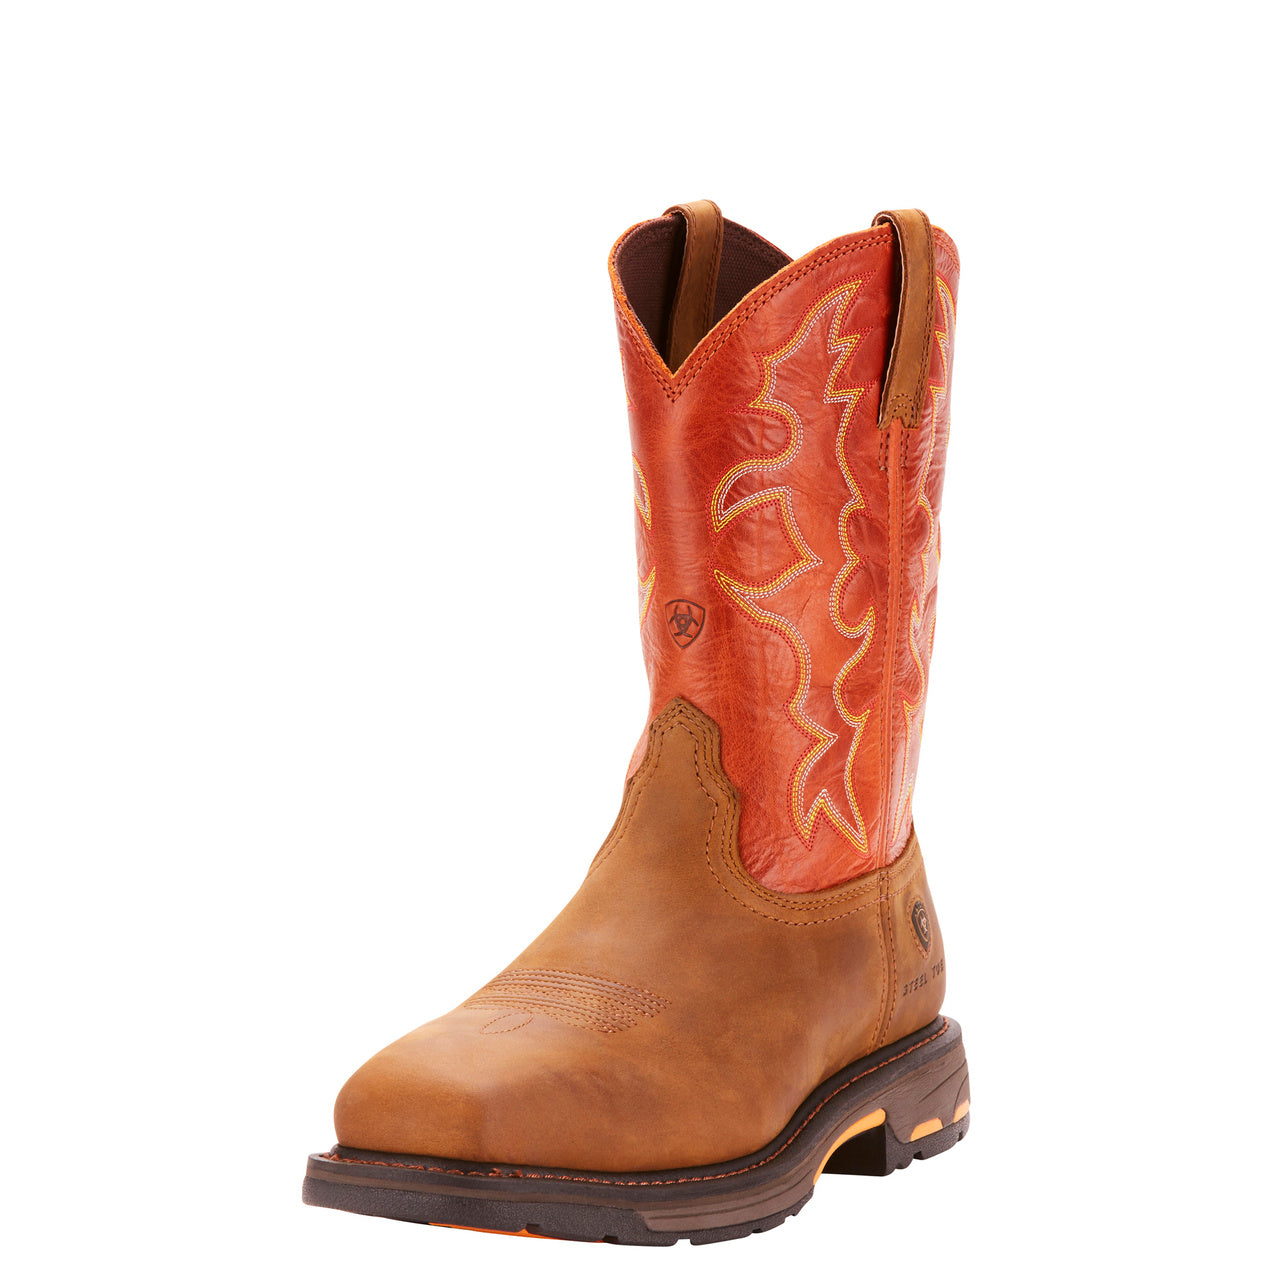 Ariat Workhog Wide Square Toe Boot 14 EE